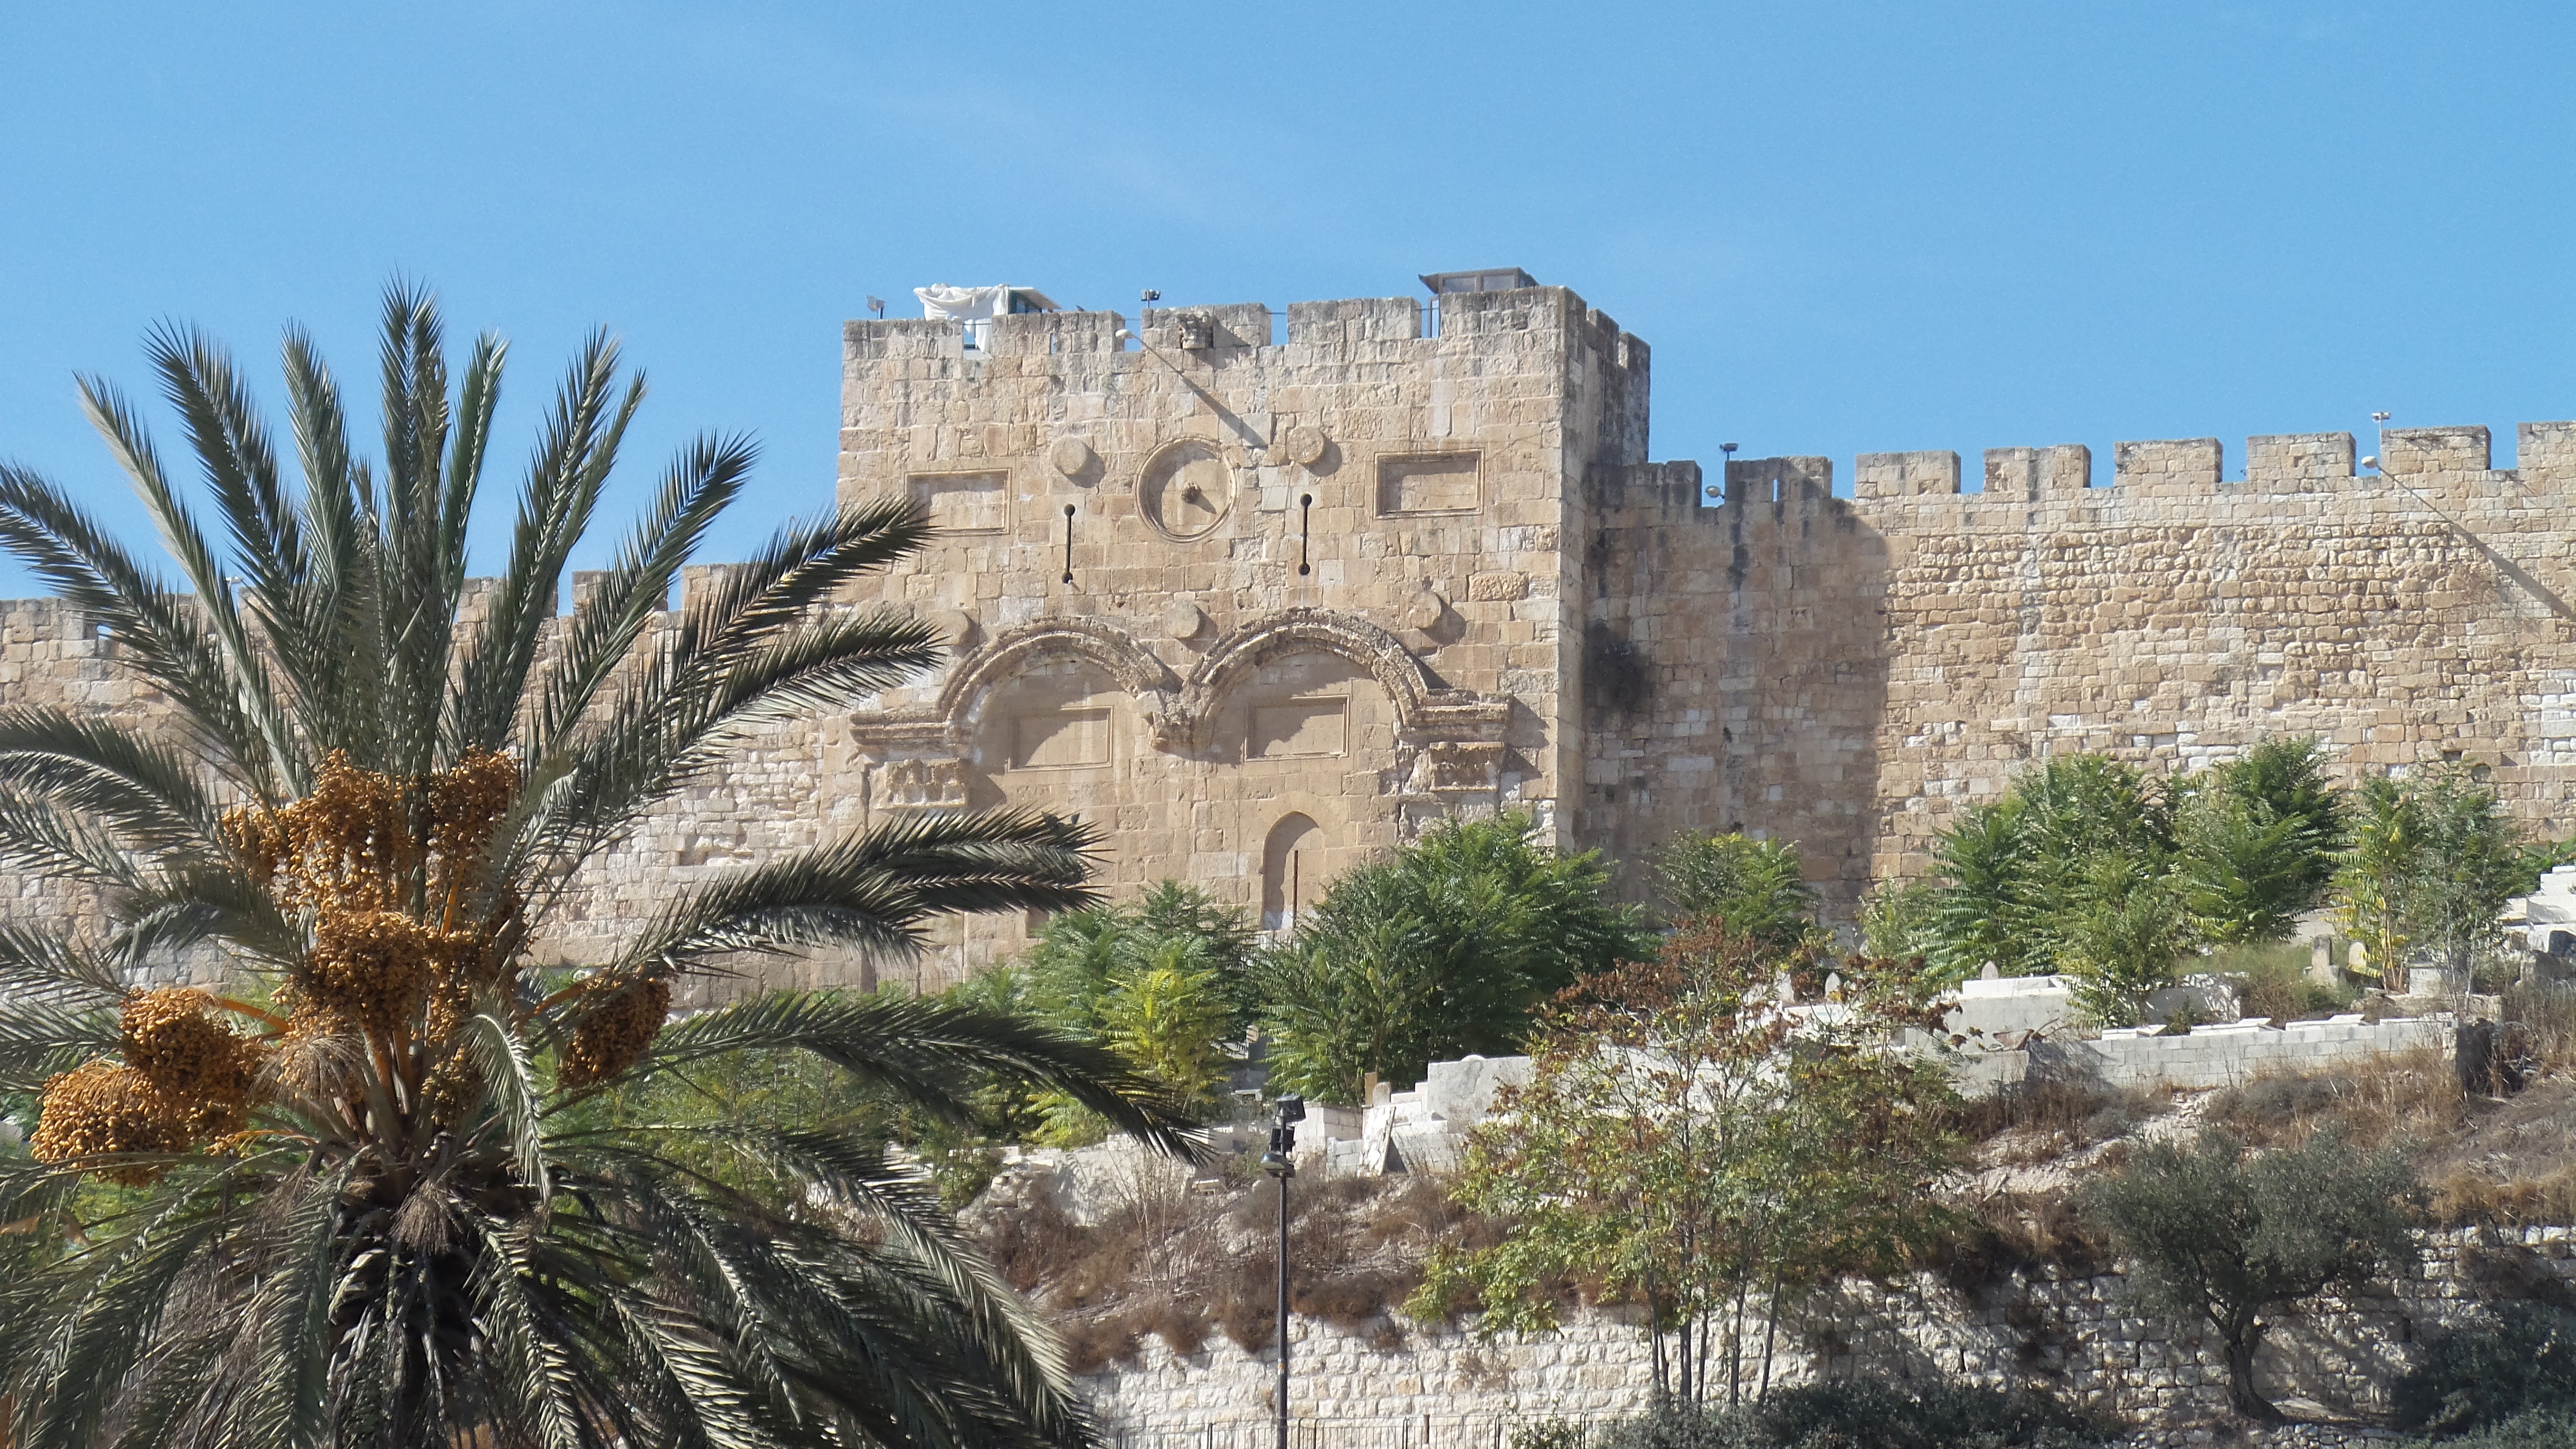 Bethlehem Uncovered: Traversing Sacred Grounds and Unexpected Commotion.